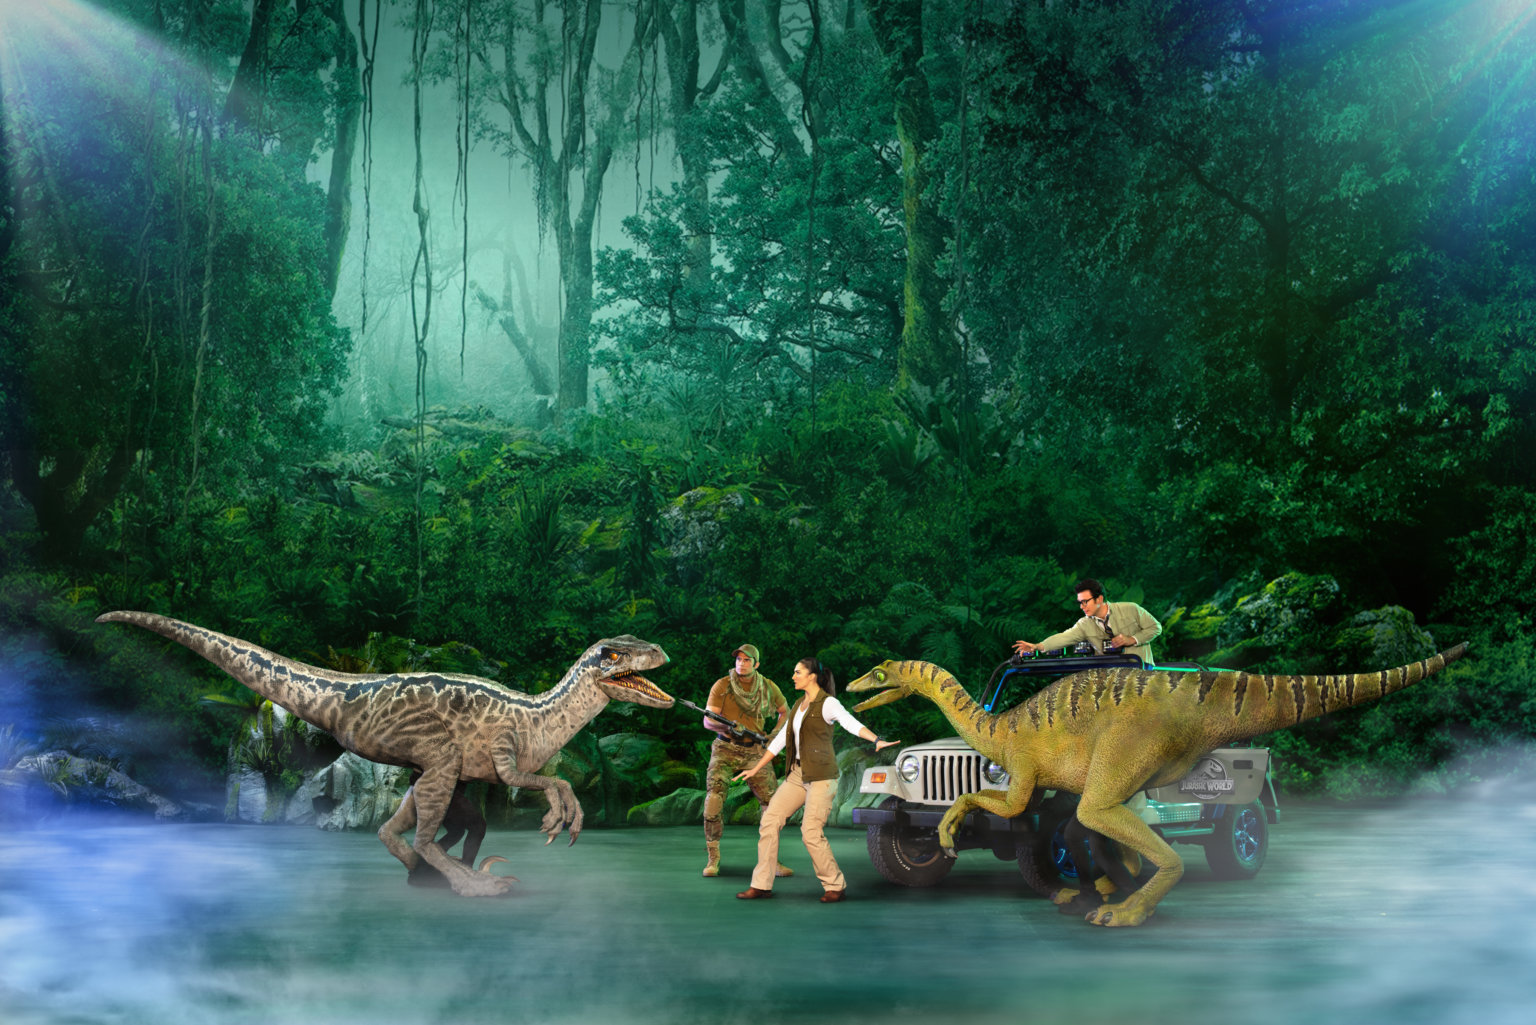 Dinos roar! Live ‘Jurassic World’ show is coming to Barclays • Brooklyn